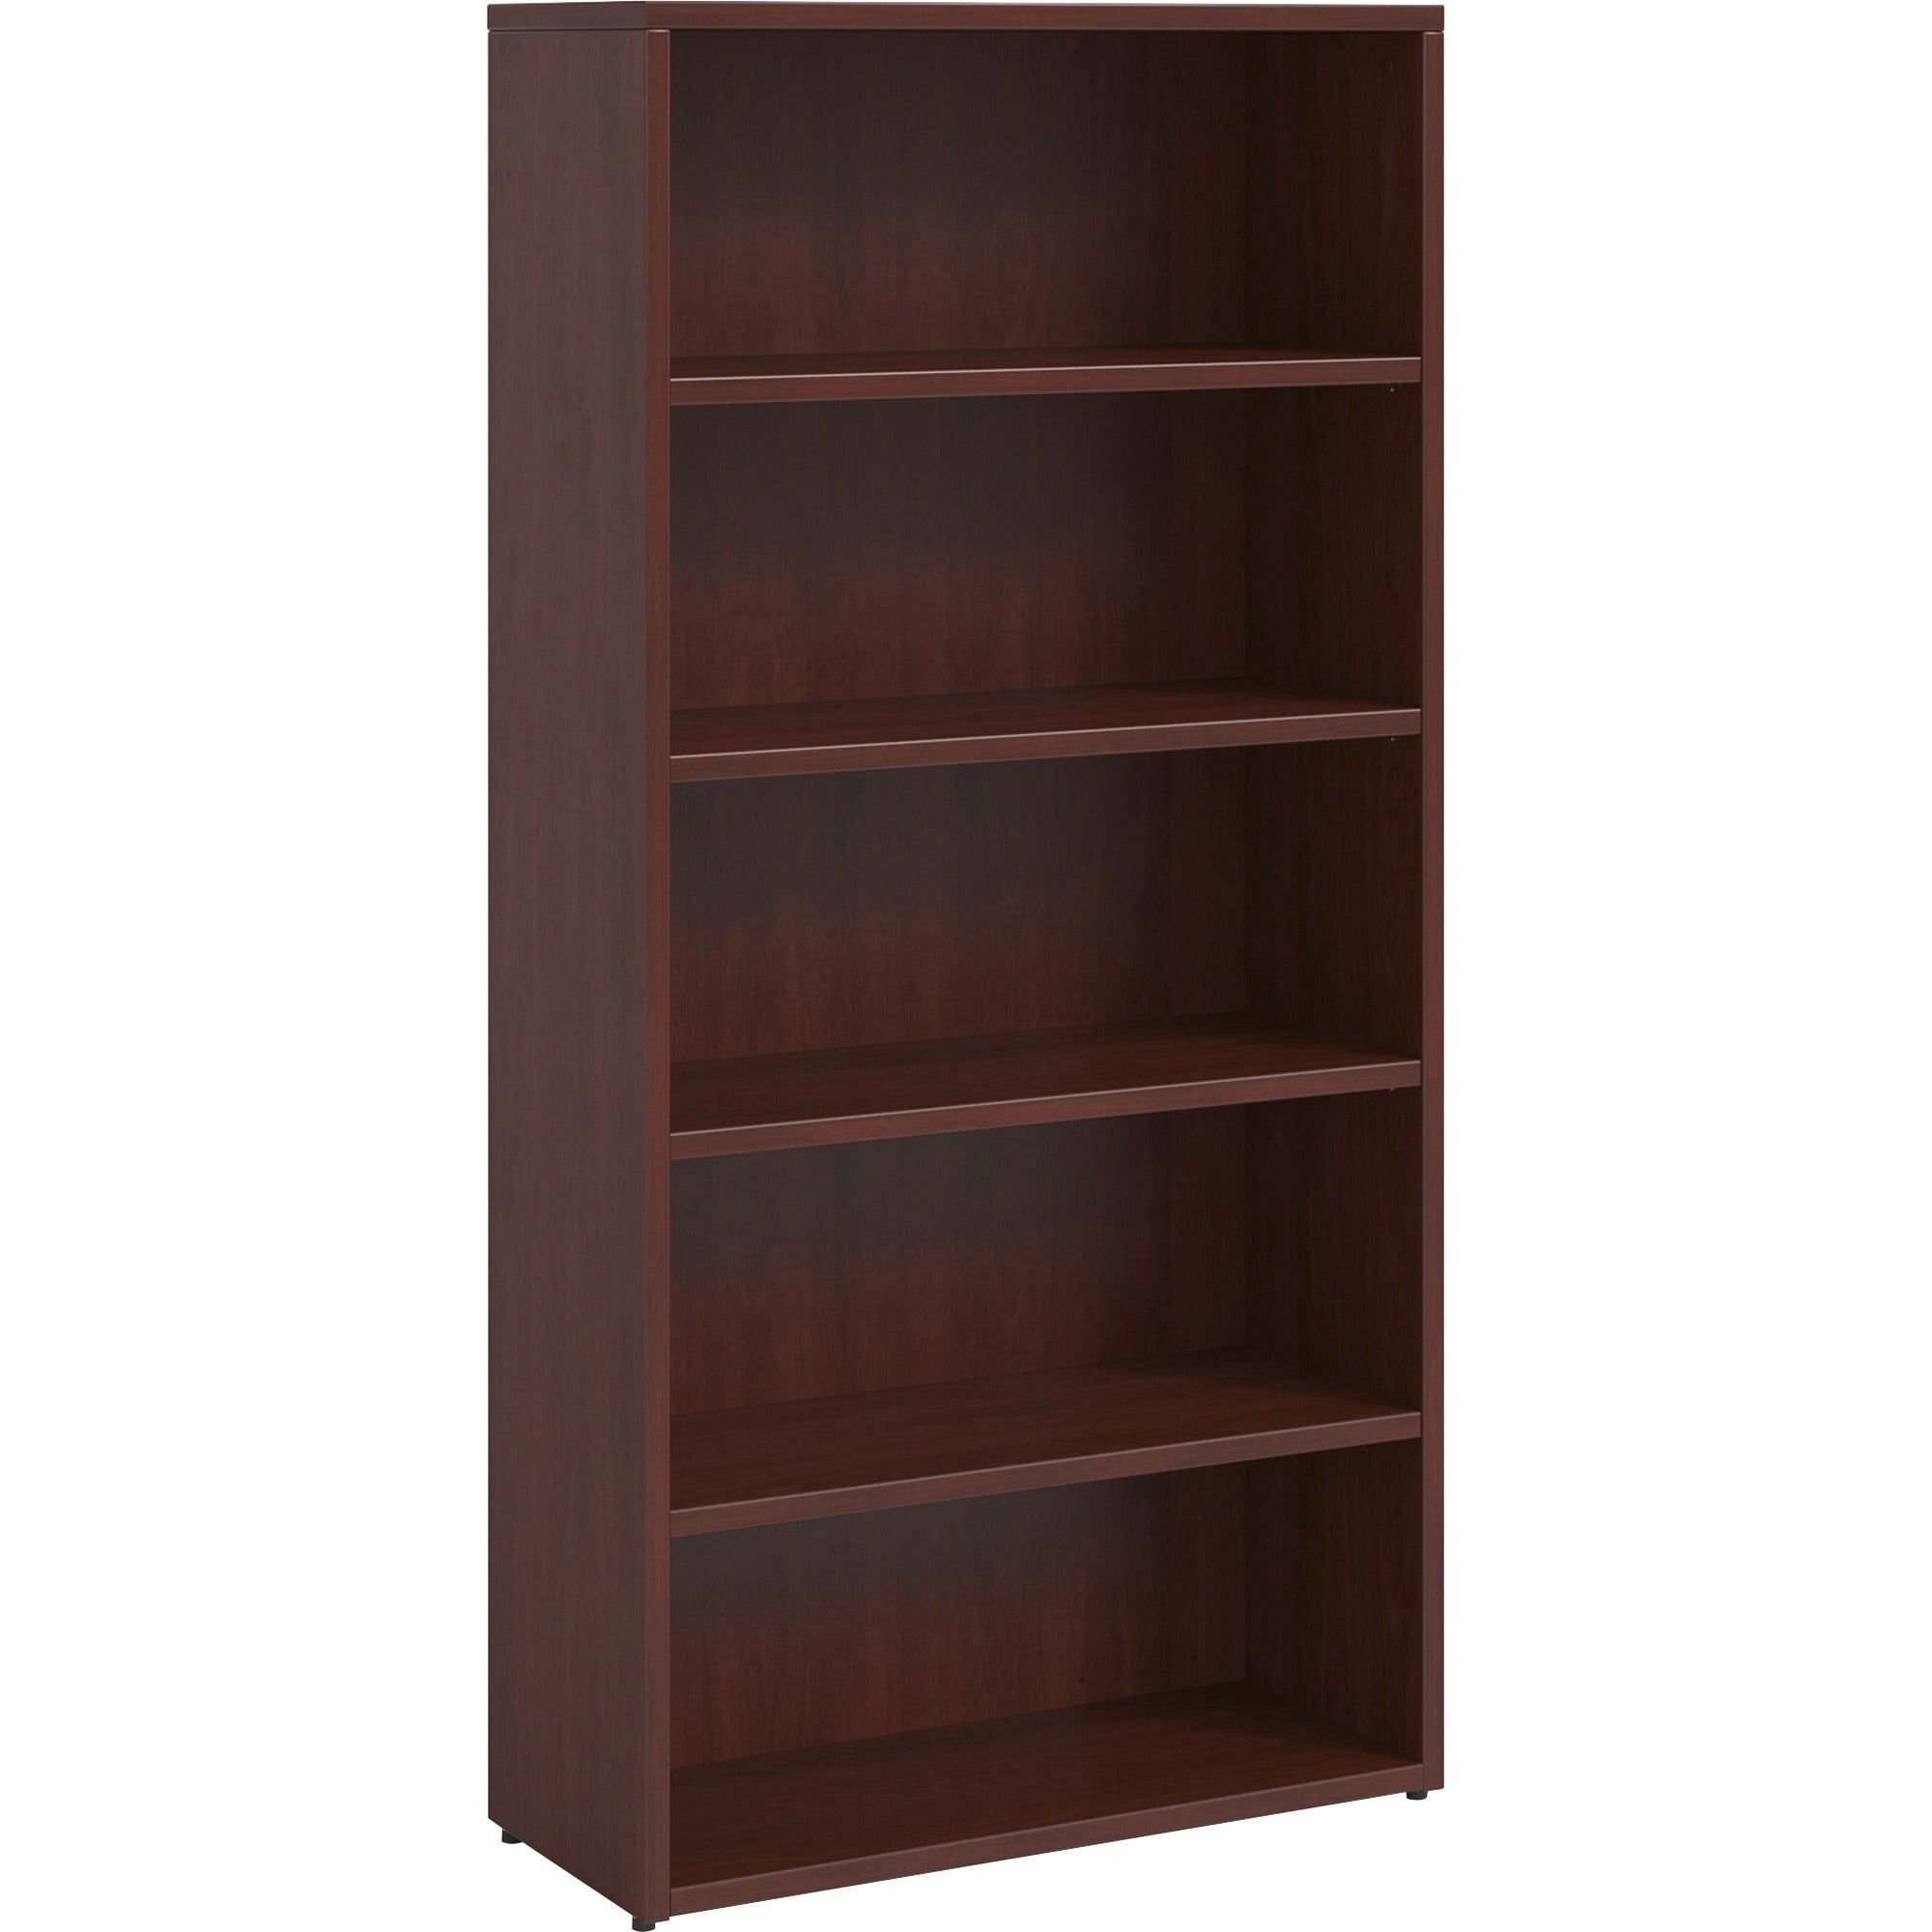 lorell-prominence-20-bookcase-34-x-1269--1-top-0-doors-6-shelves-band-edge-material-particleboard-finish-laminate_llrpbk3469my - 1